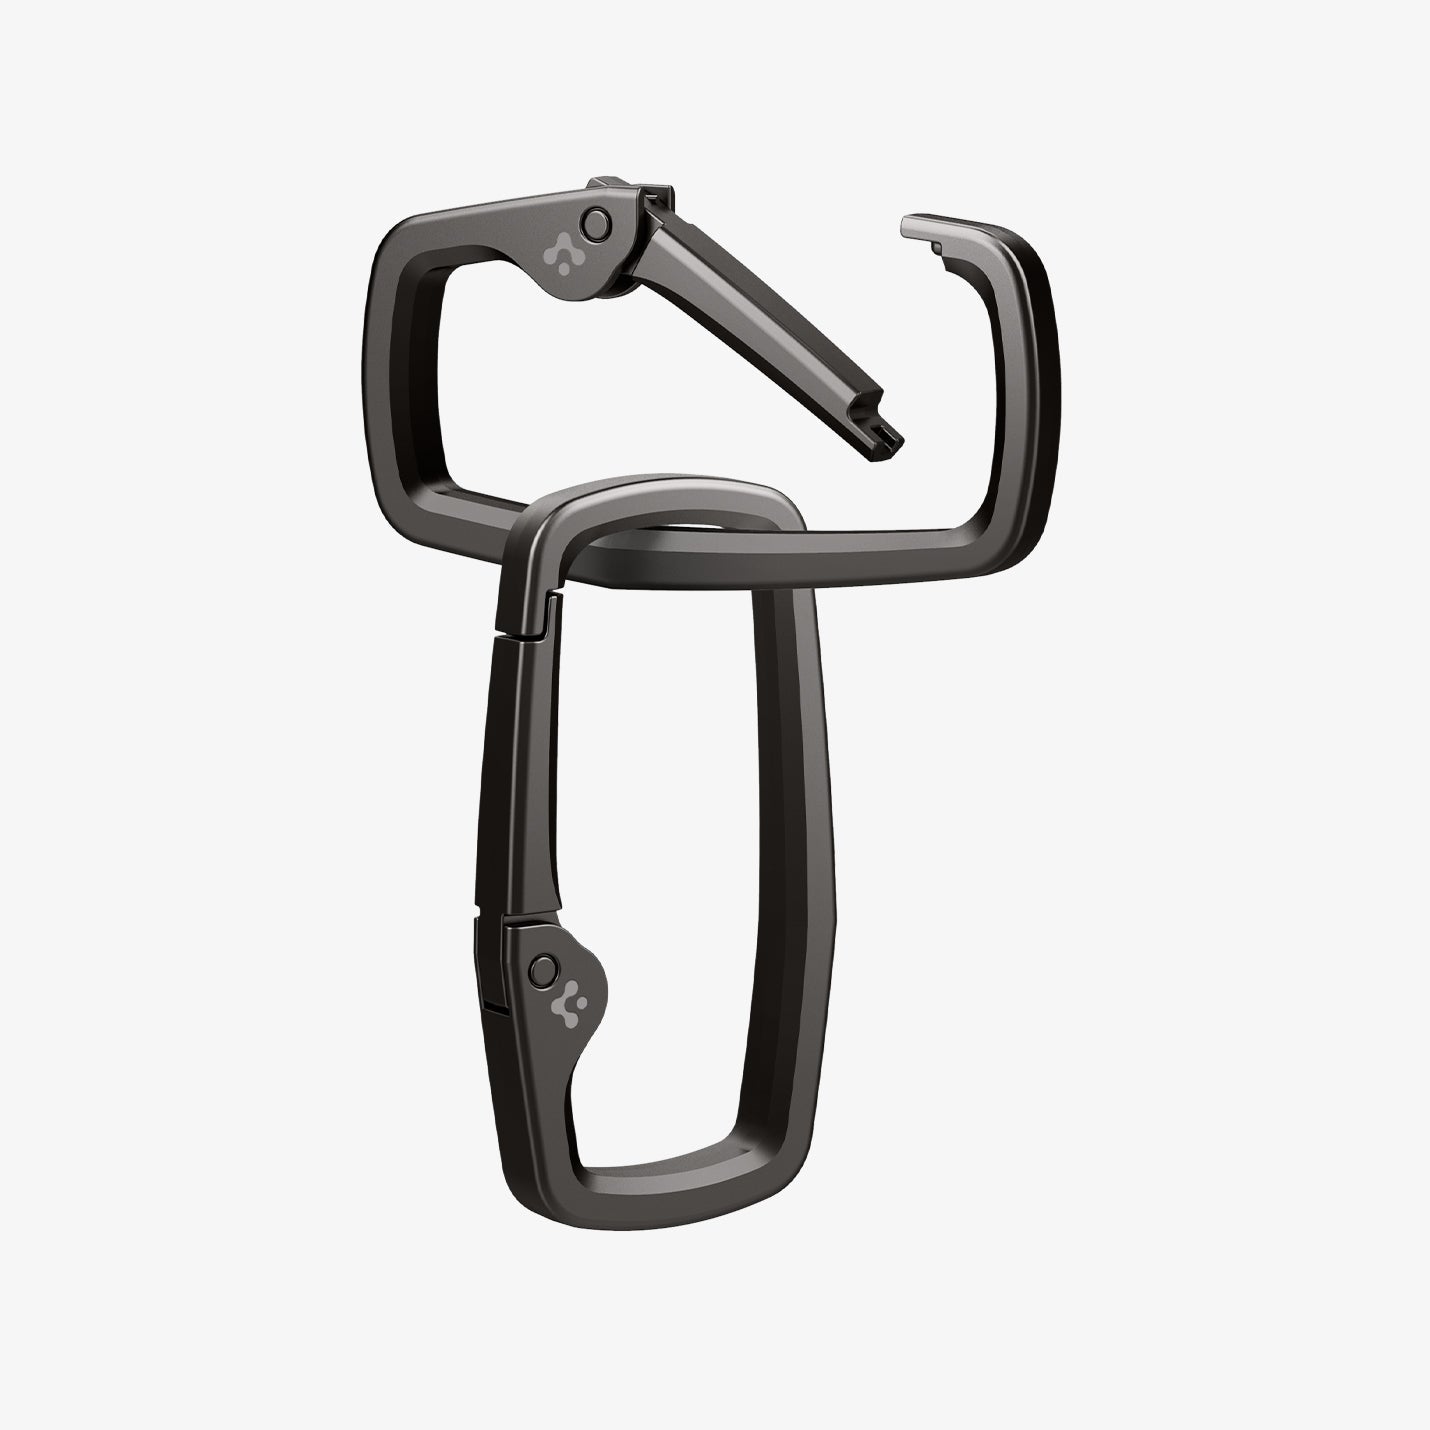 AHP02933 - Carabiner Rugged Type in black showing a carabiner attached to another carabiner